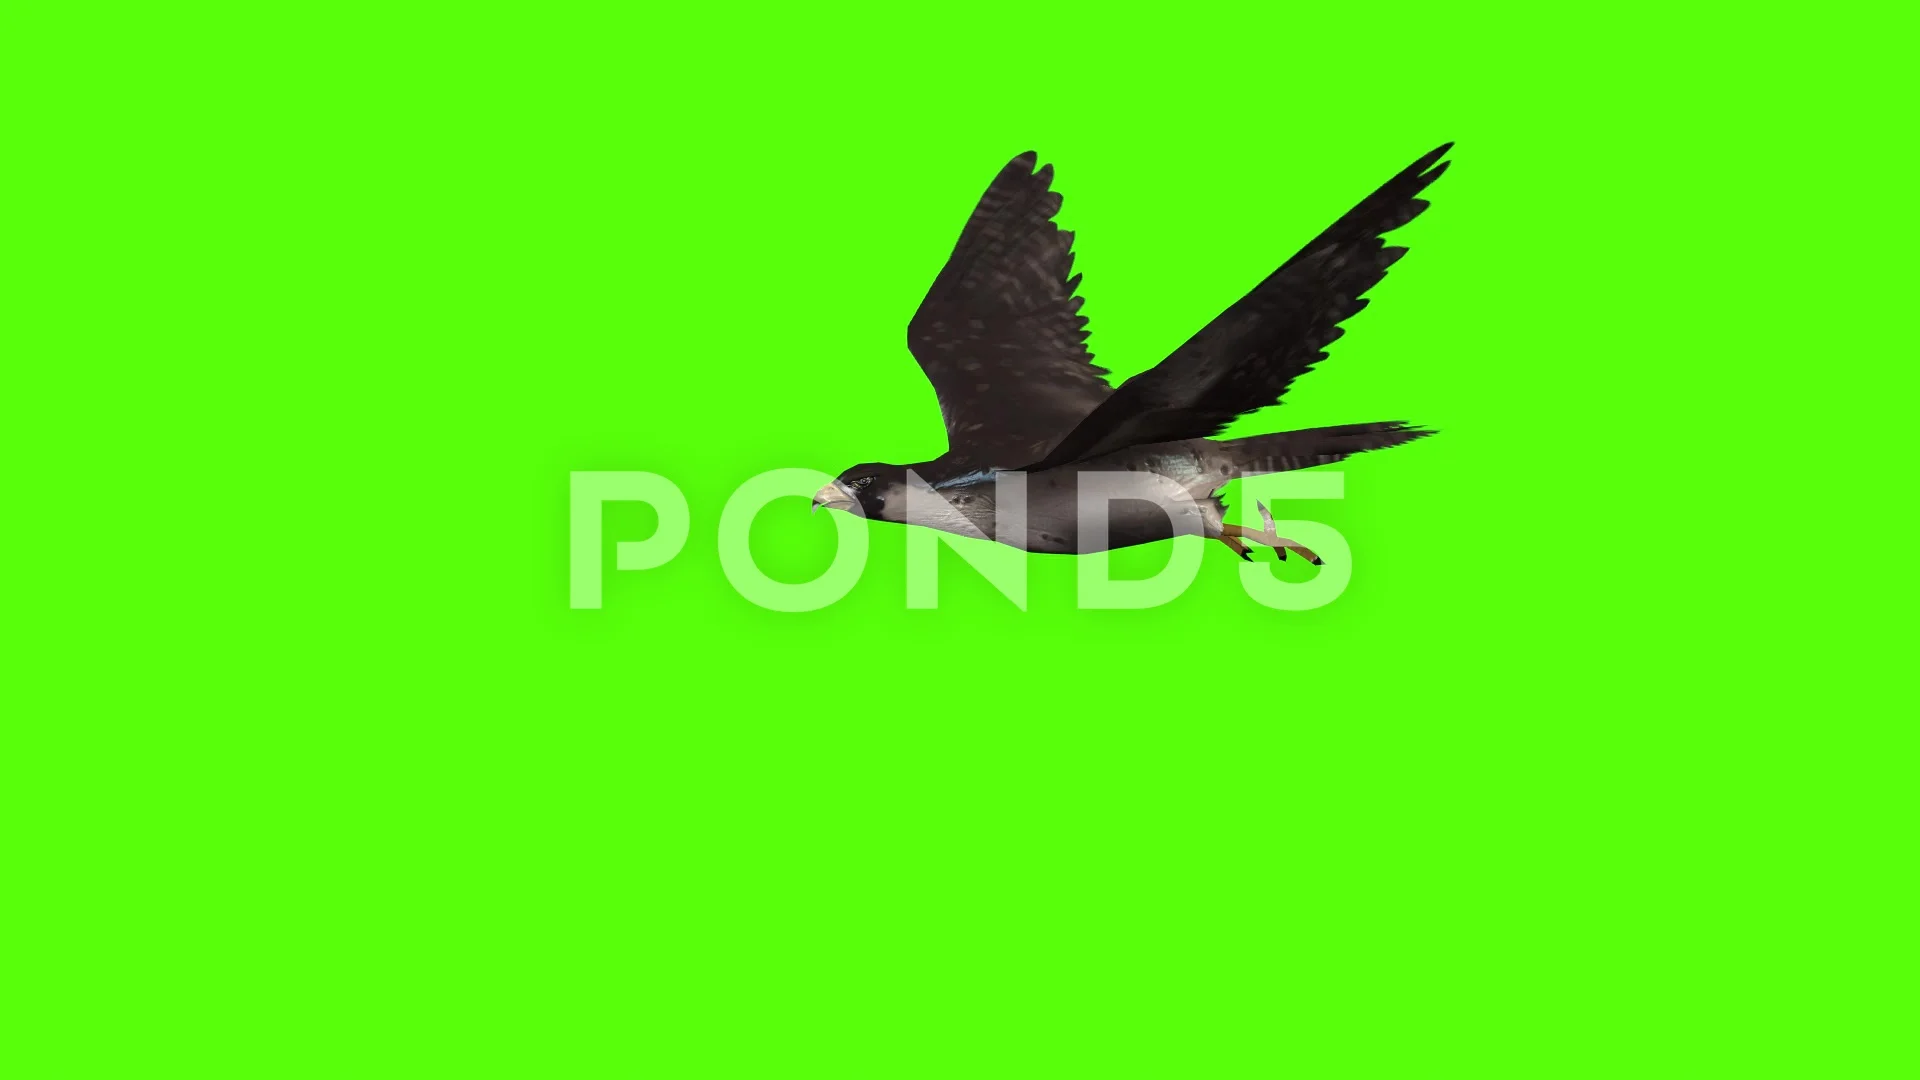 Bird Flying Animation Stock Footage ~ Royalty Free Stock Videos | Pond5